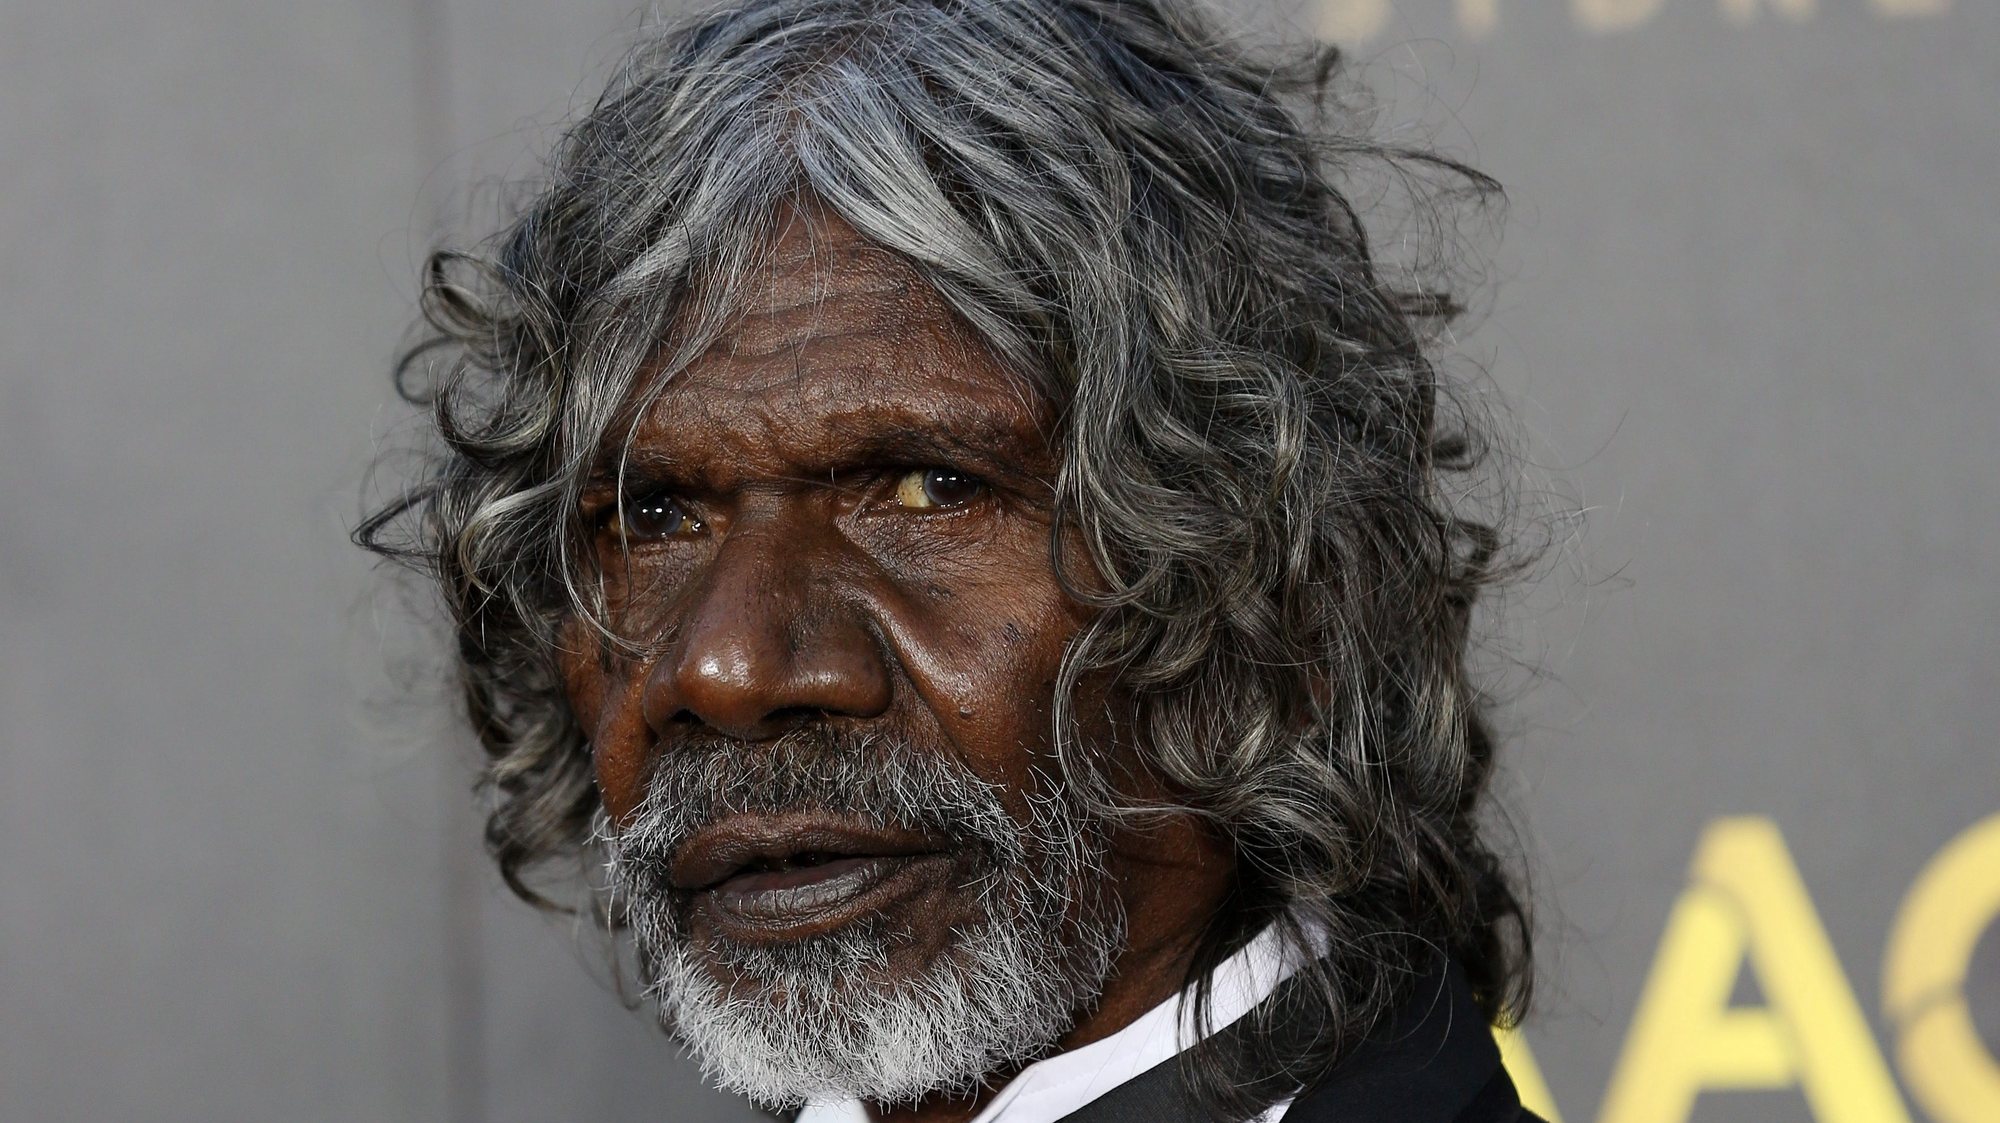 epa04592956 Australian actor David Gulpilil arrives for the AACTA (Australian Academy of Cinema and Television Arts) Awards 2015 held at the Star Event Centre in Sydney, Australia, 29 January 2015.  EPA/NIKKI SHORT AUSTRALIA AND NEW ZEALAND OUT